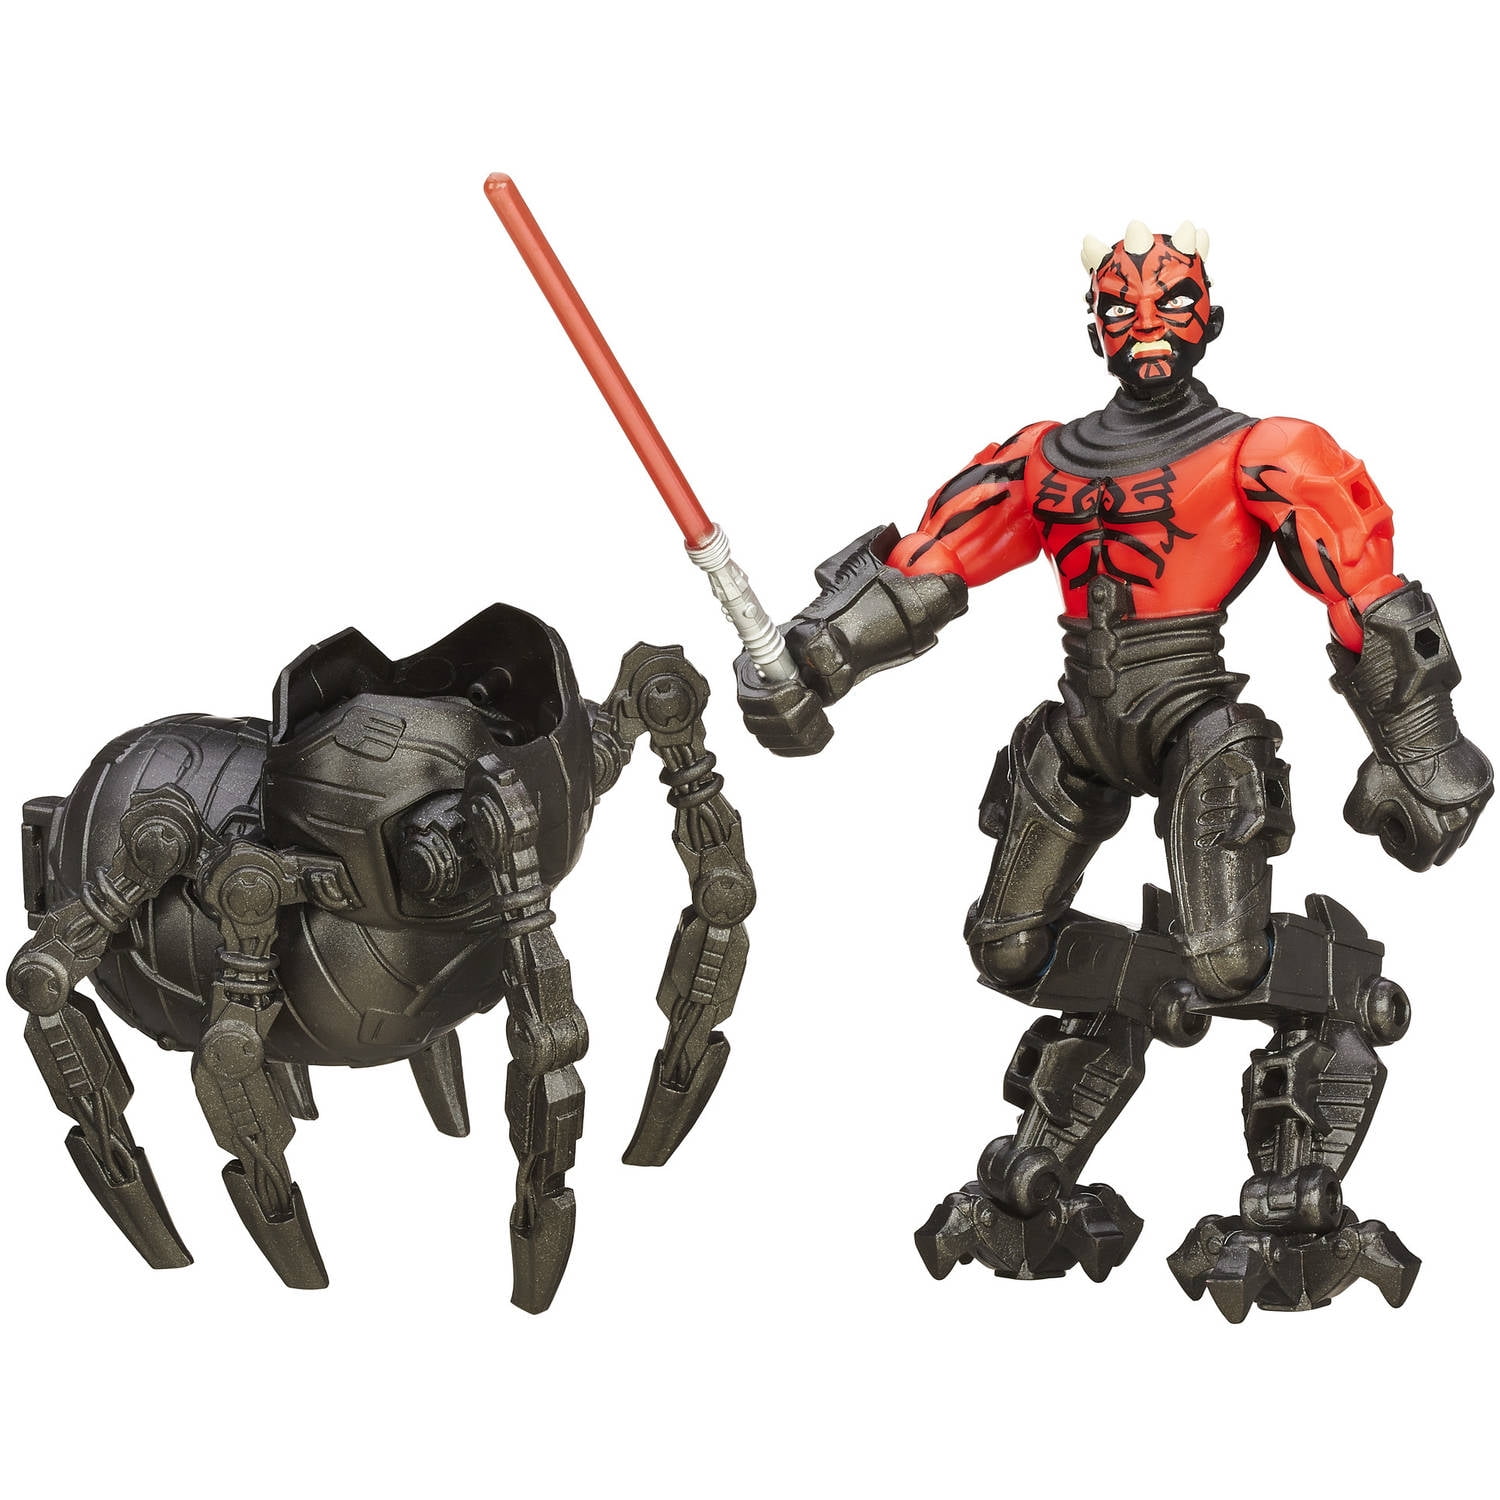 Hero Mashers Sith Speeder and Darth Maul Action Figure for sale online Hasbro Star Wars 